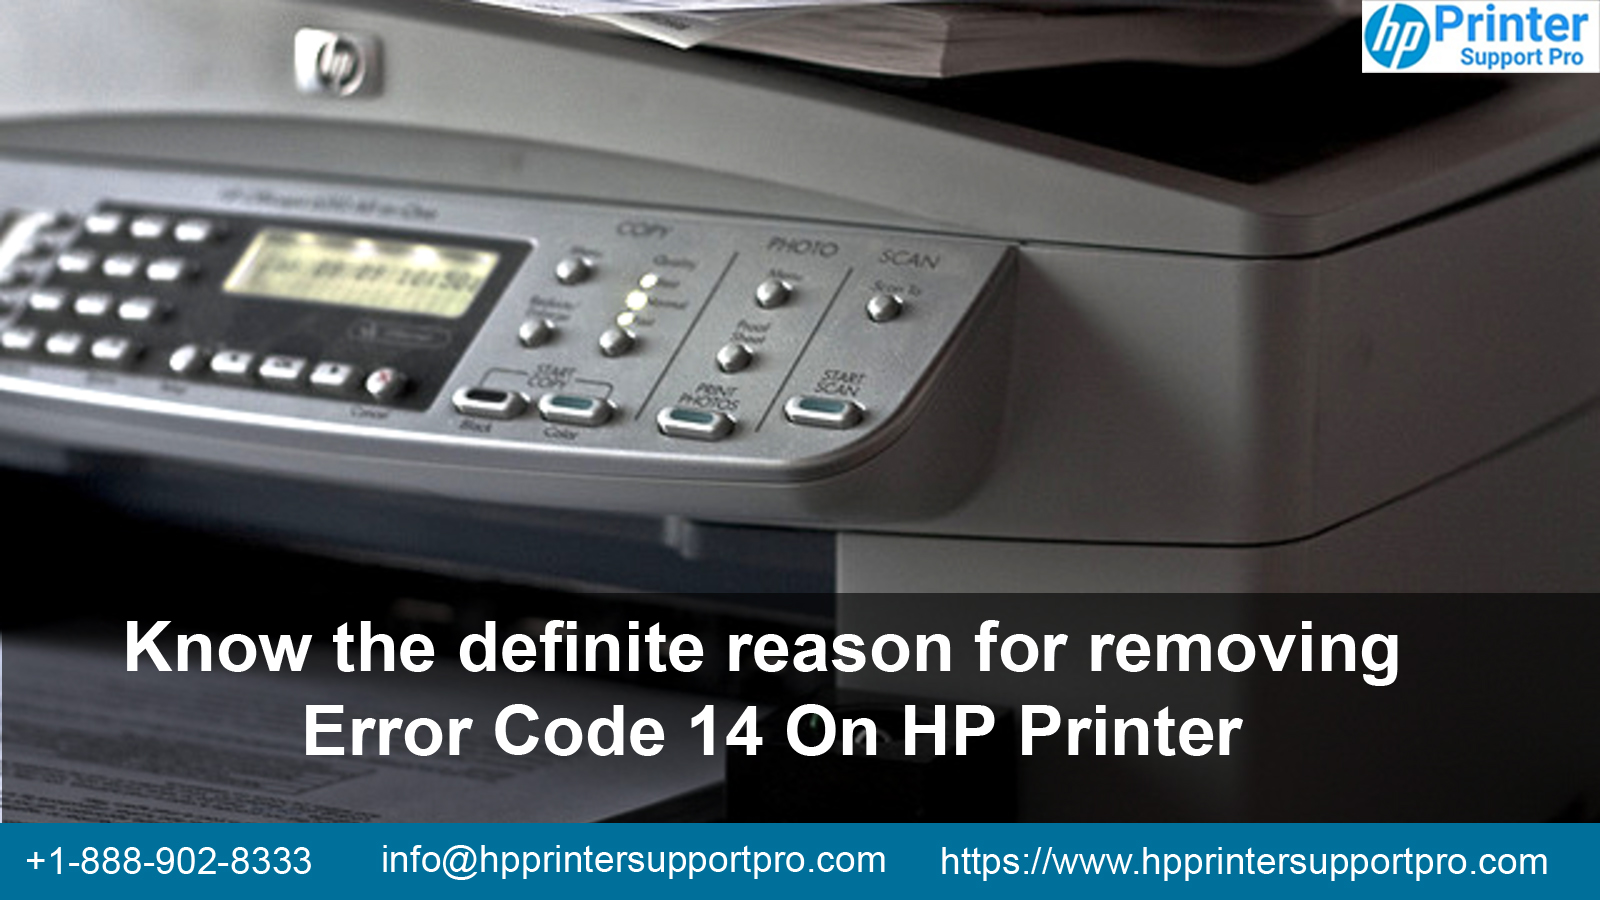 Know the definite reason for removing Error Code 14 On HP Printer